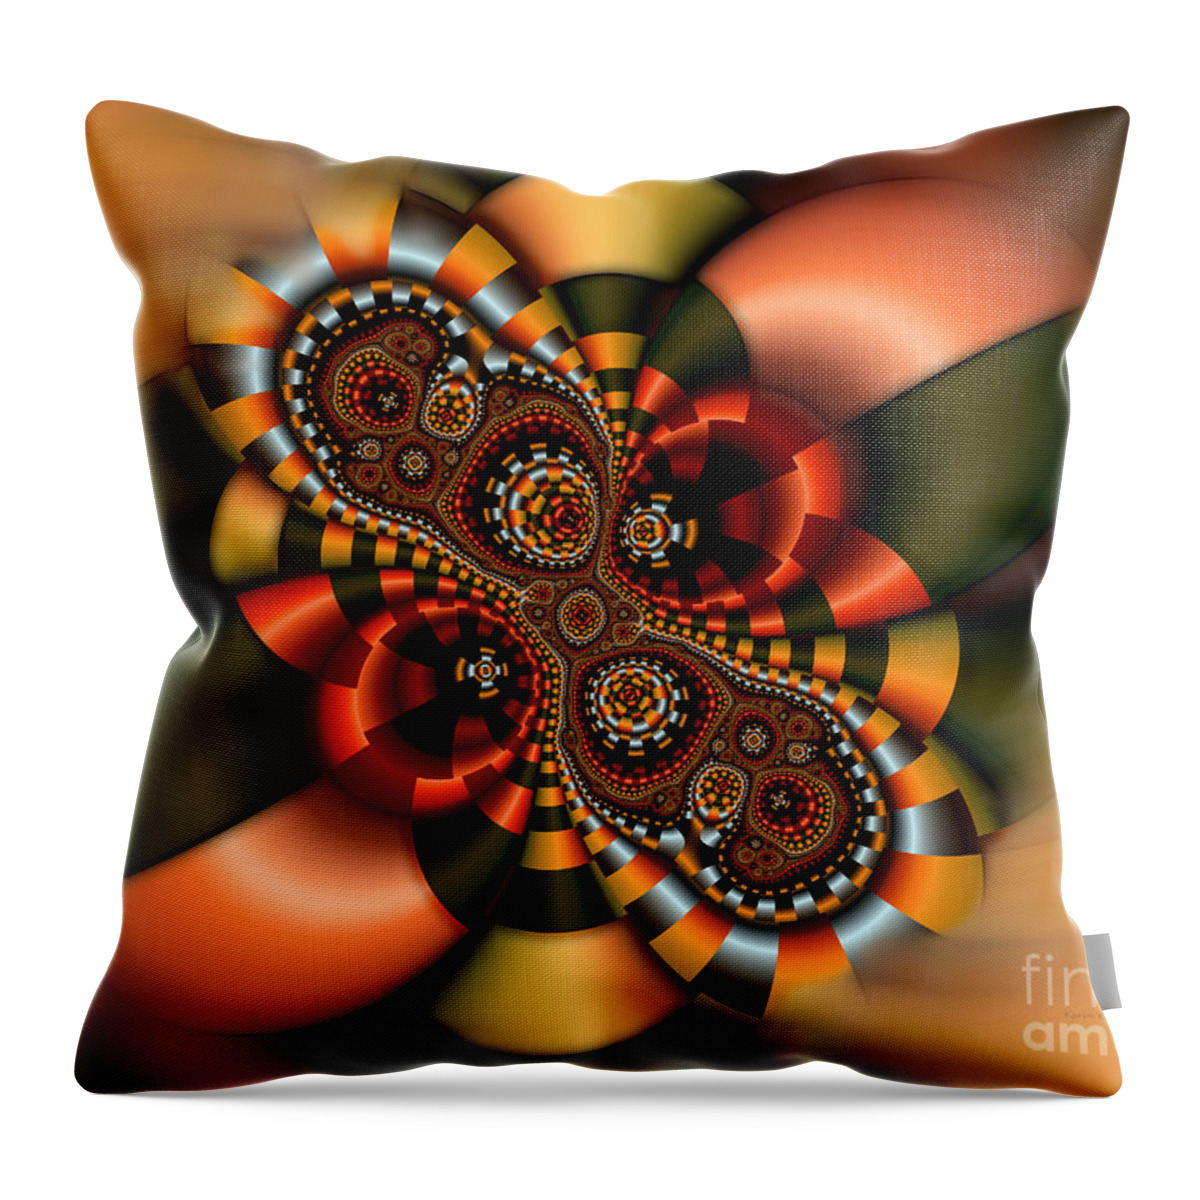 Abstract Throw Pillow featuring the digital art Sweets by Karin Kuhlmann